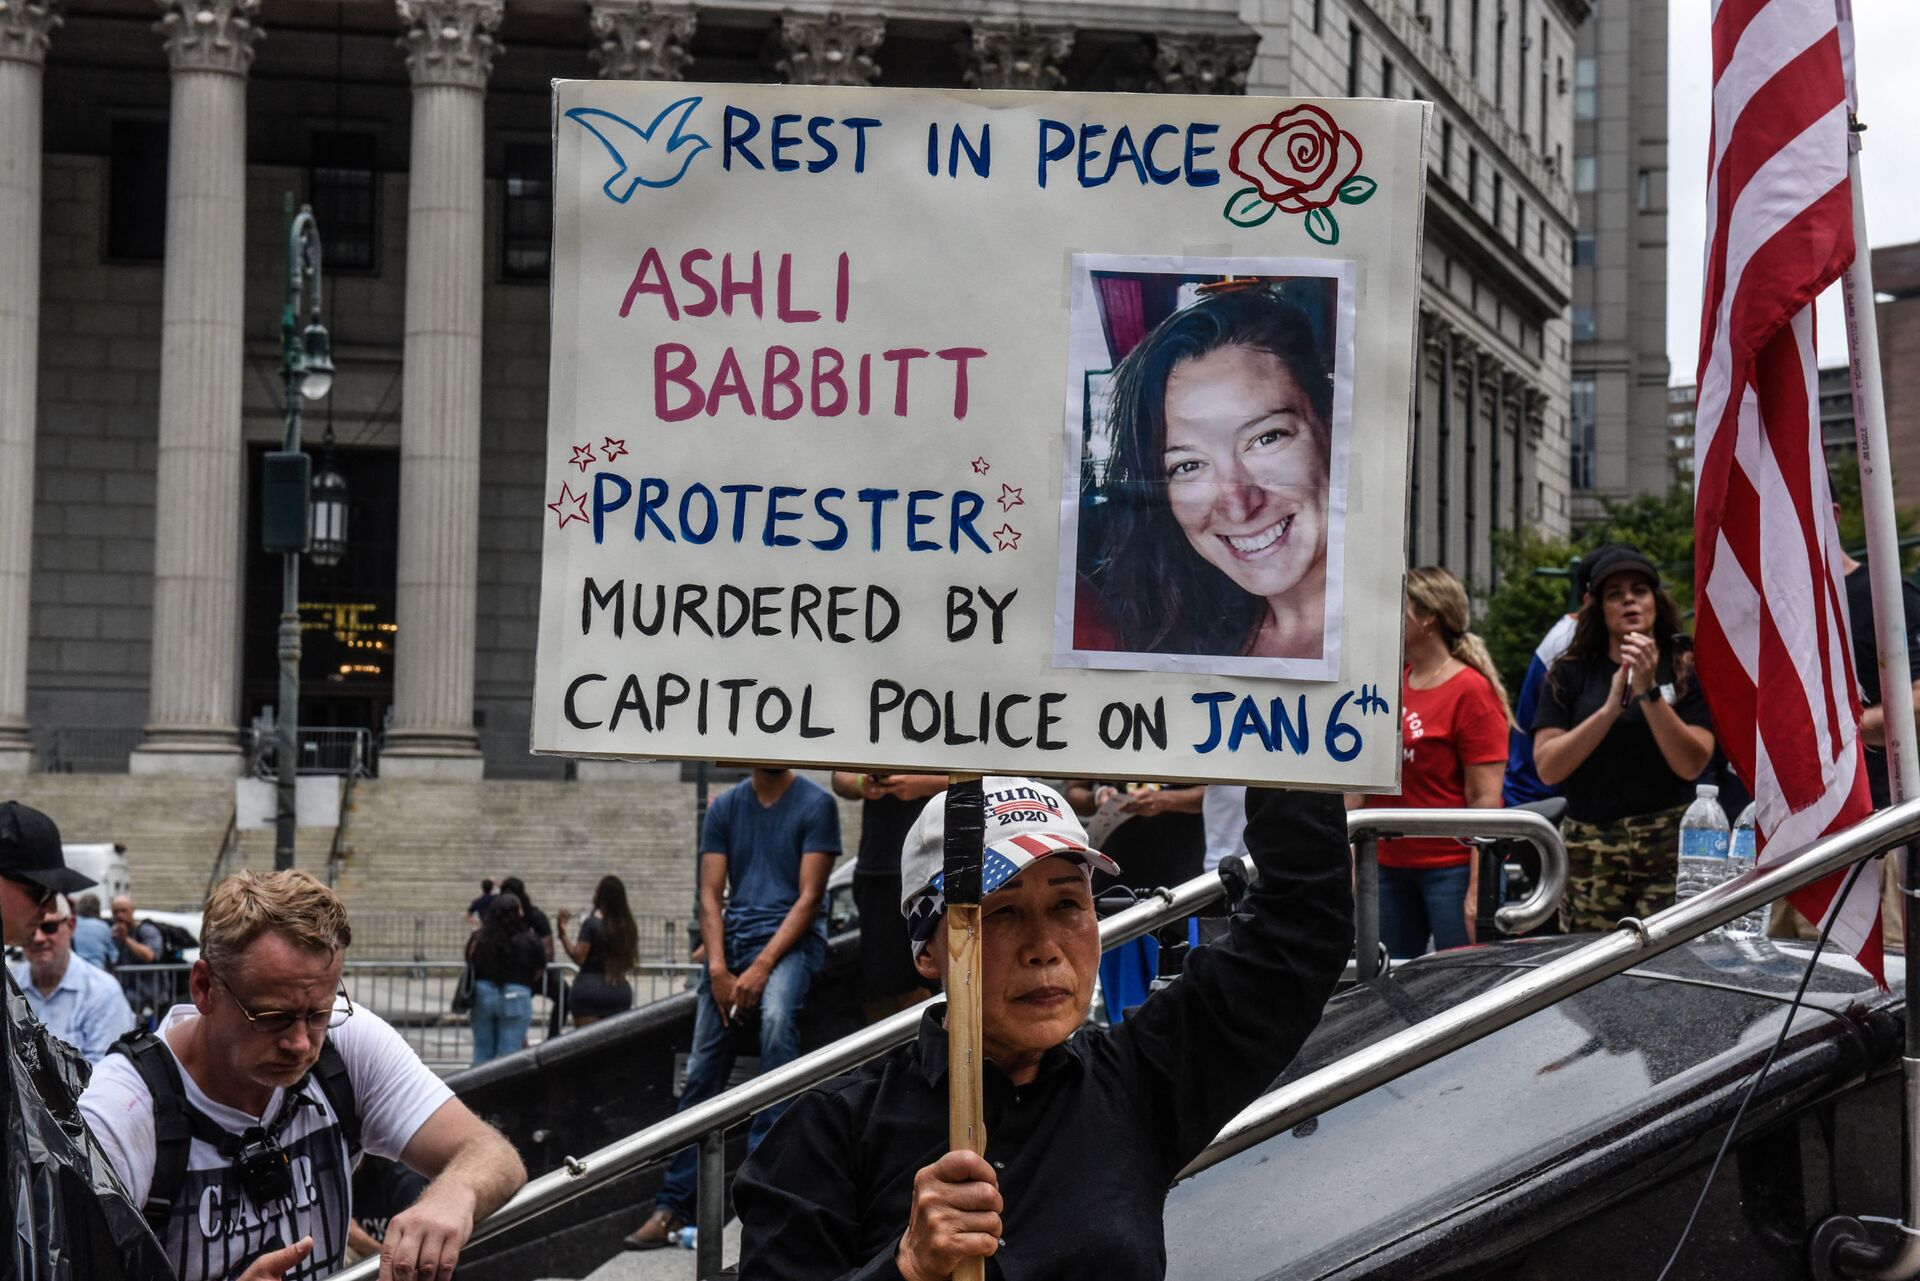 A right wing protester holds a sign about Ashli Babbitt while participating in a political rally on July 25, 2021 in New York City. - Sputnik International, 1920, 22.12.2021